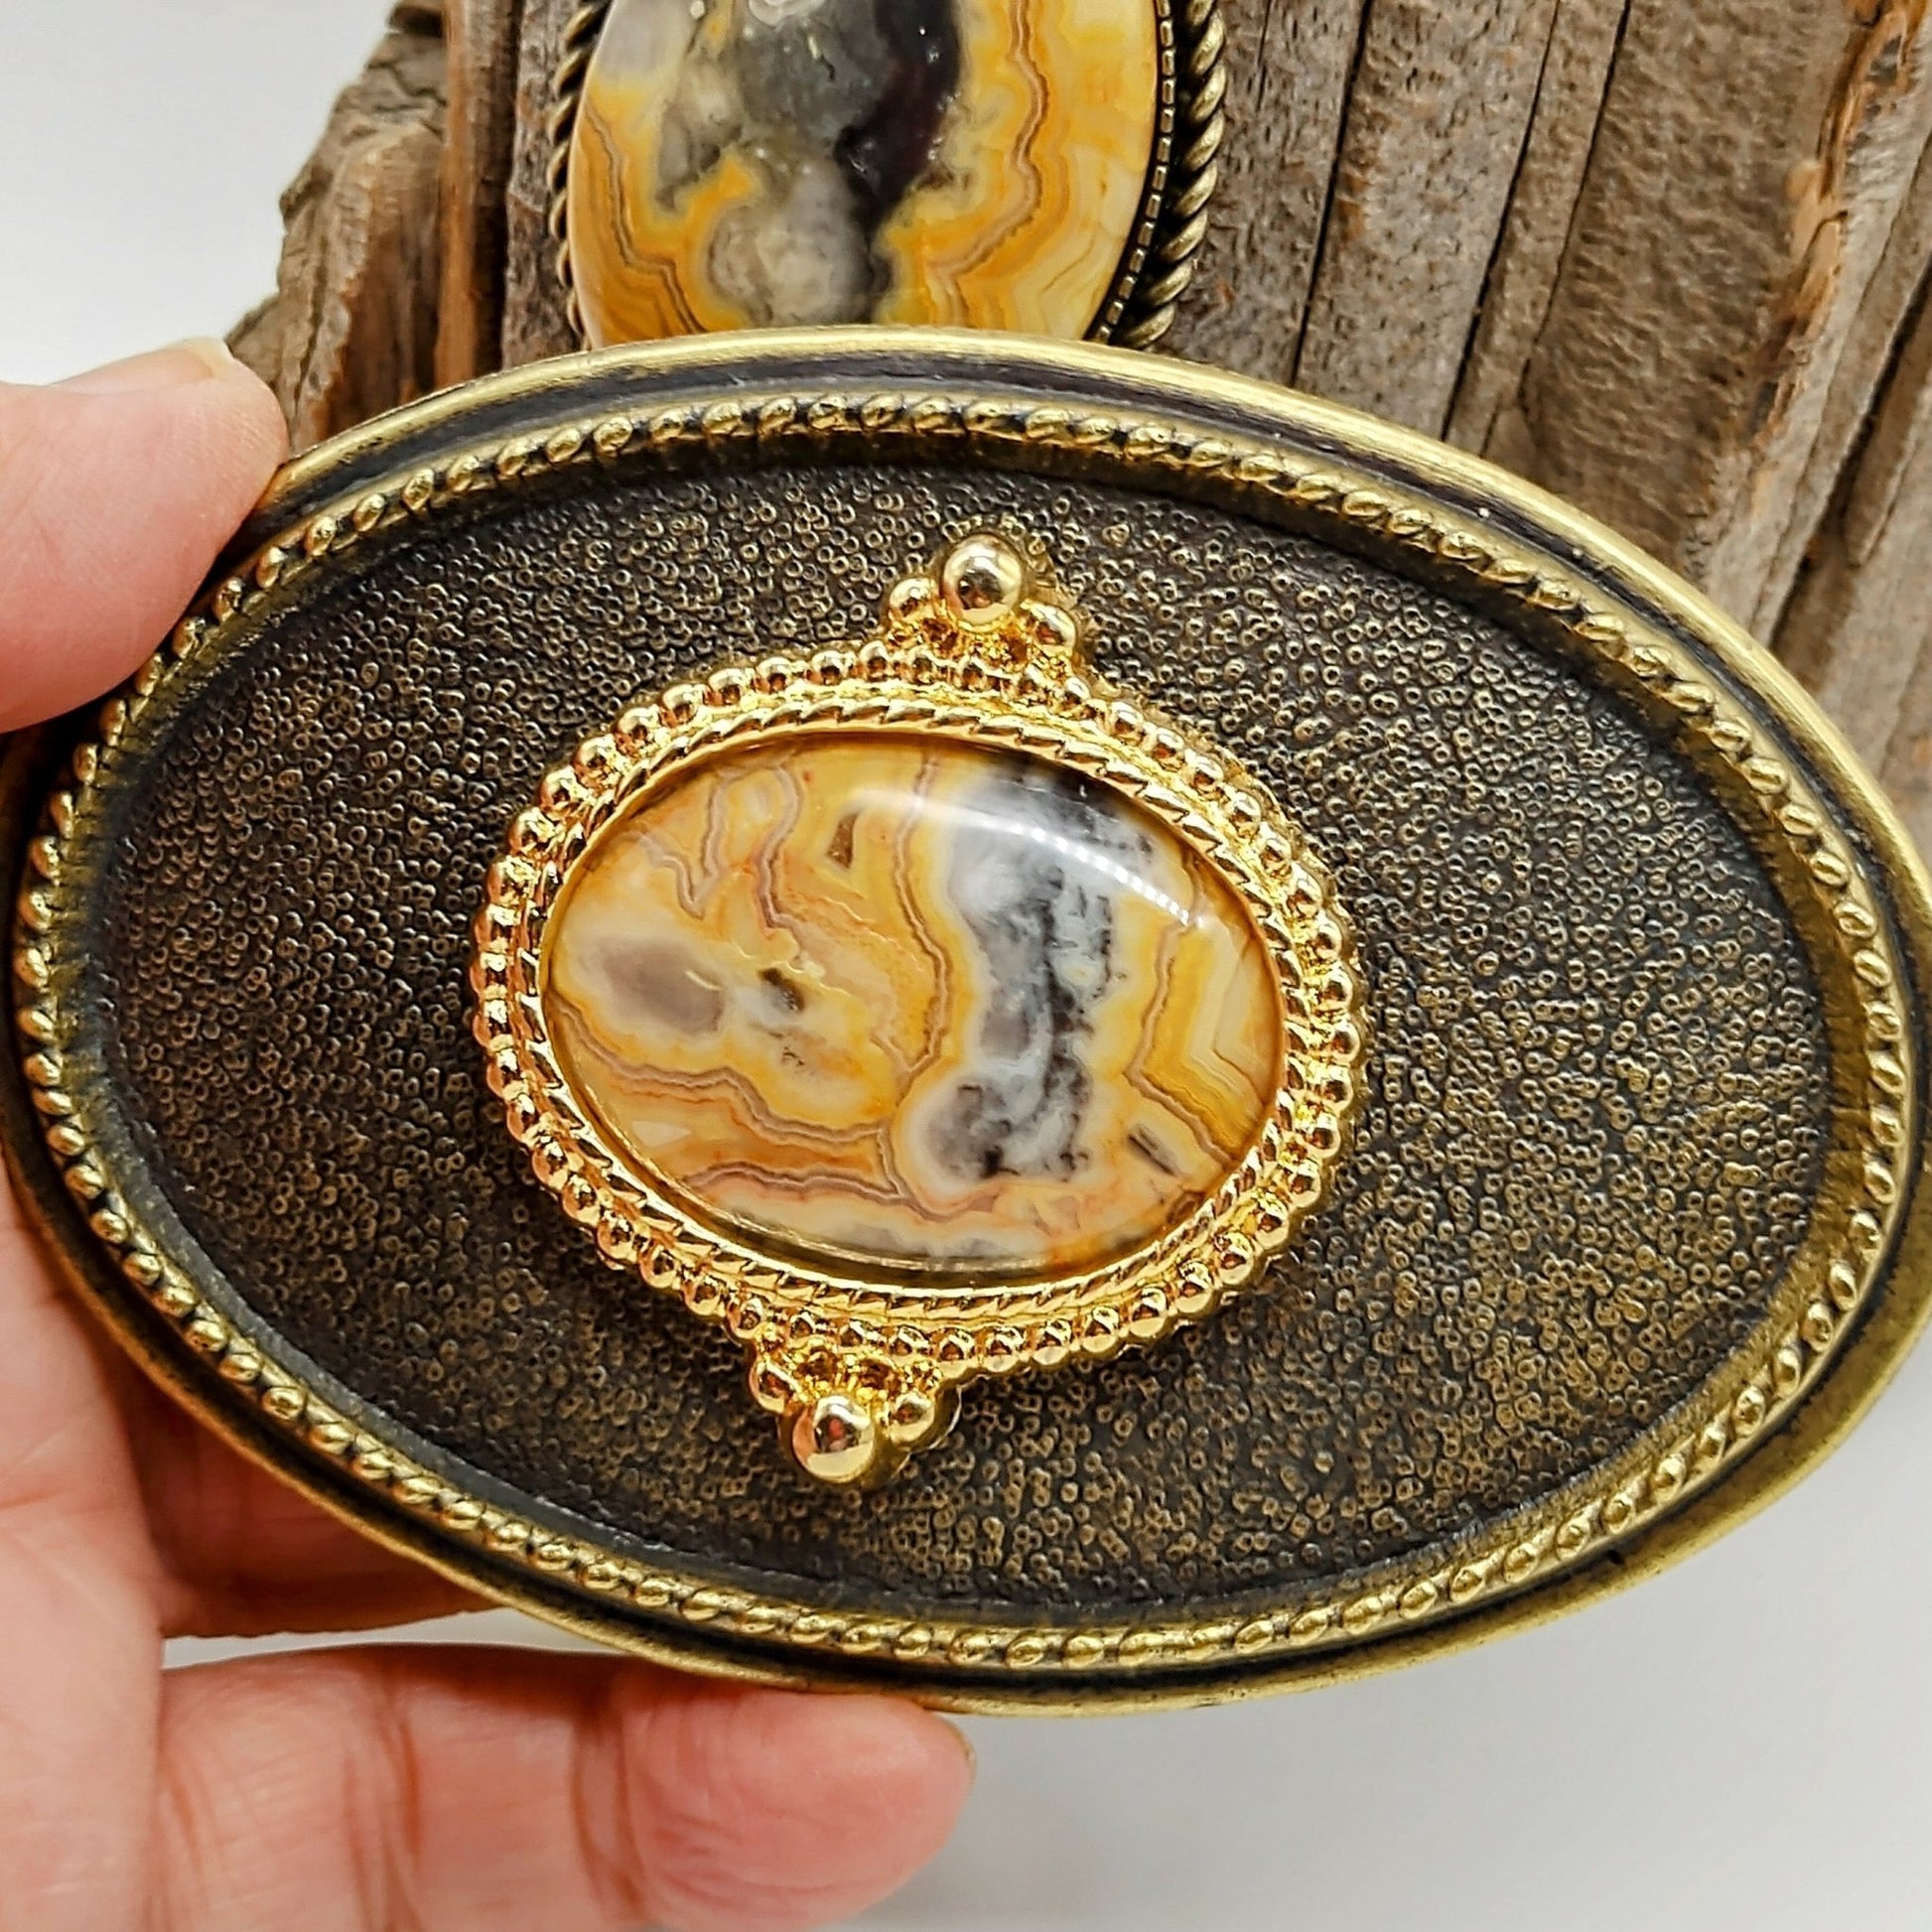 Matching Crazy Lace Agate Bolo Tie & Belt Buckle Gold Tone Set - Folks On The Edge